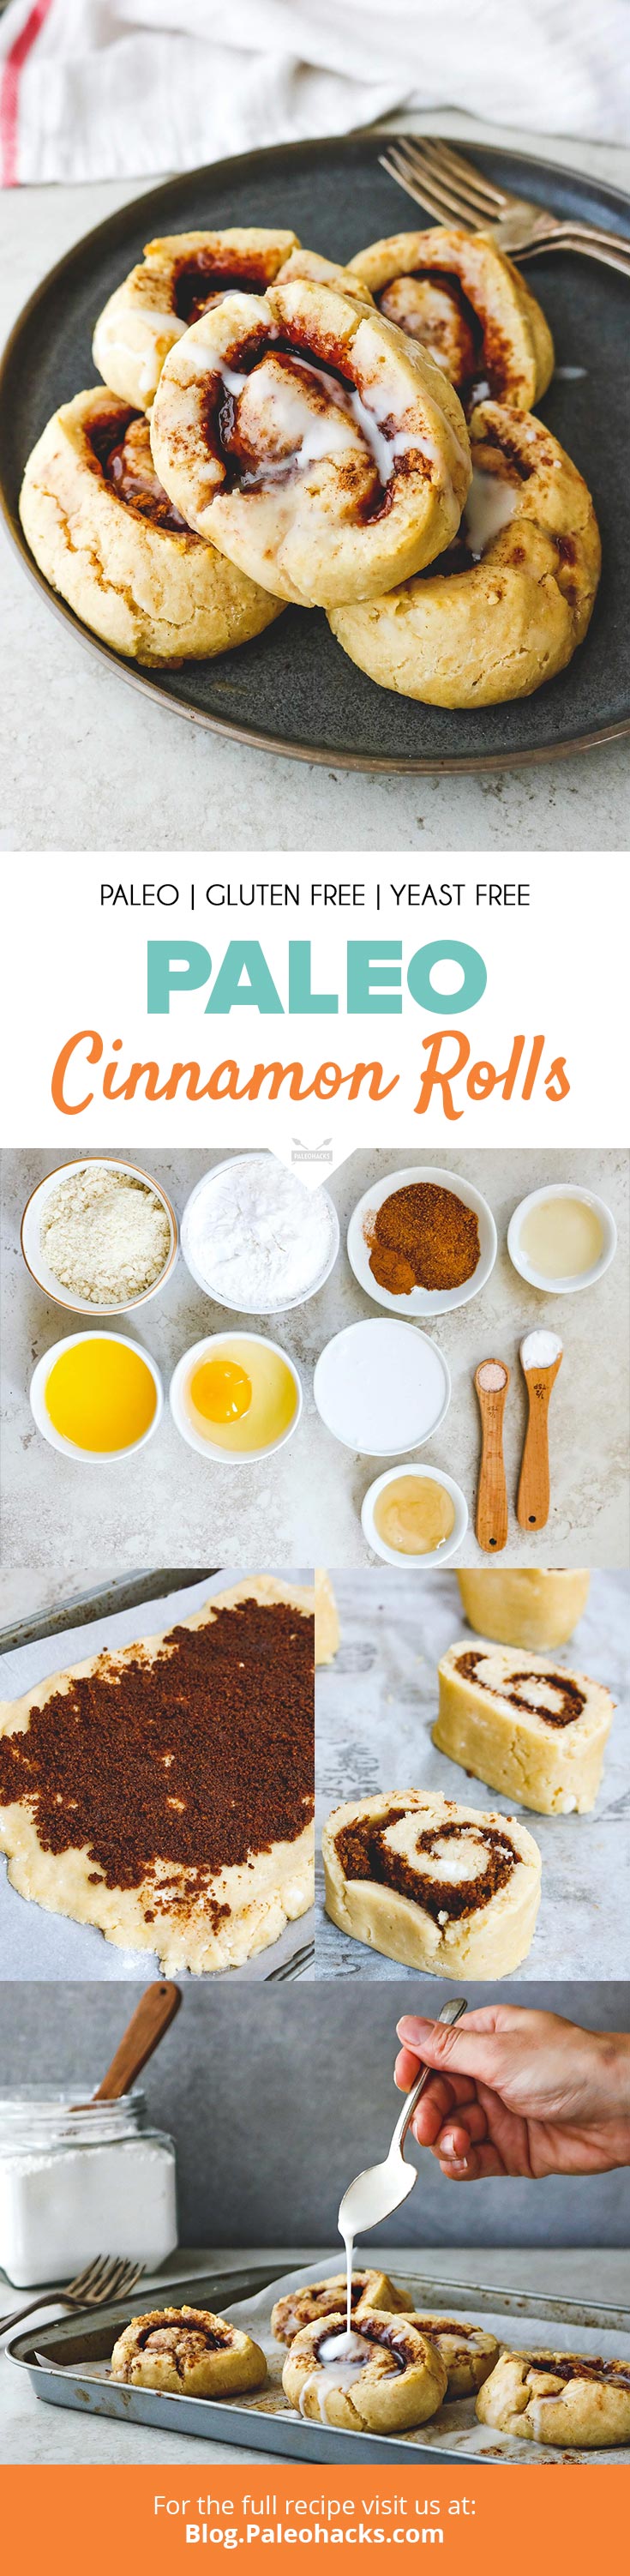 Forget those store-bought cinnamon rolls at the mall! These homemade Paleo Cinnamon Rolls are naturally sweetened for a gluten-free treat without the sugar crash.